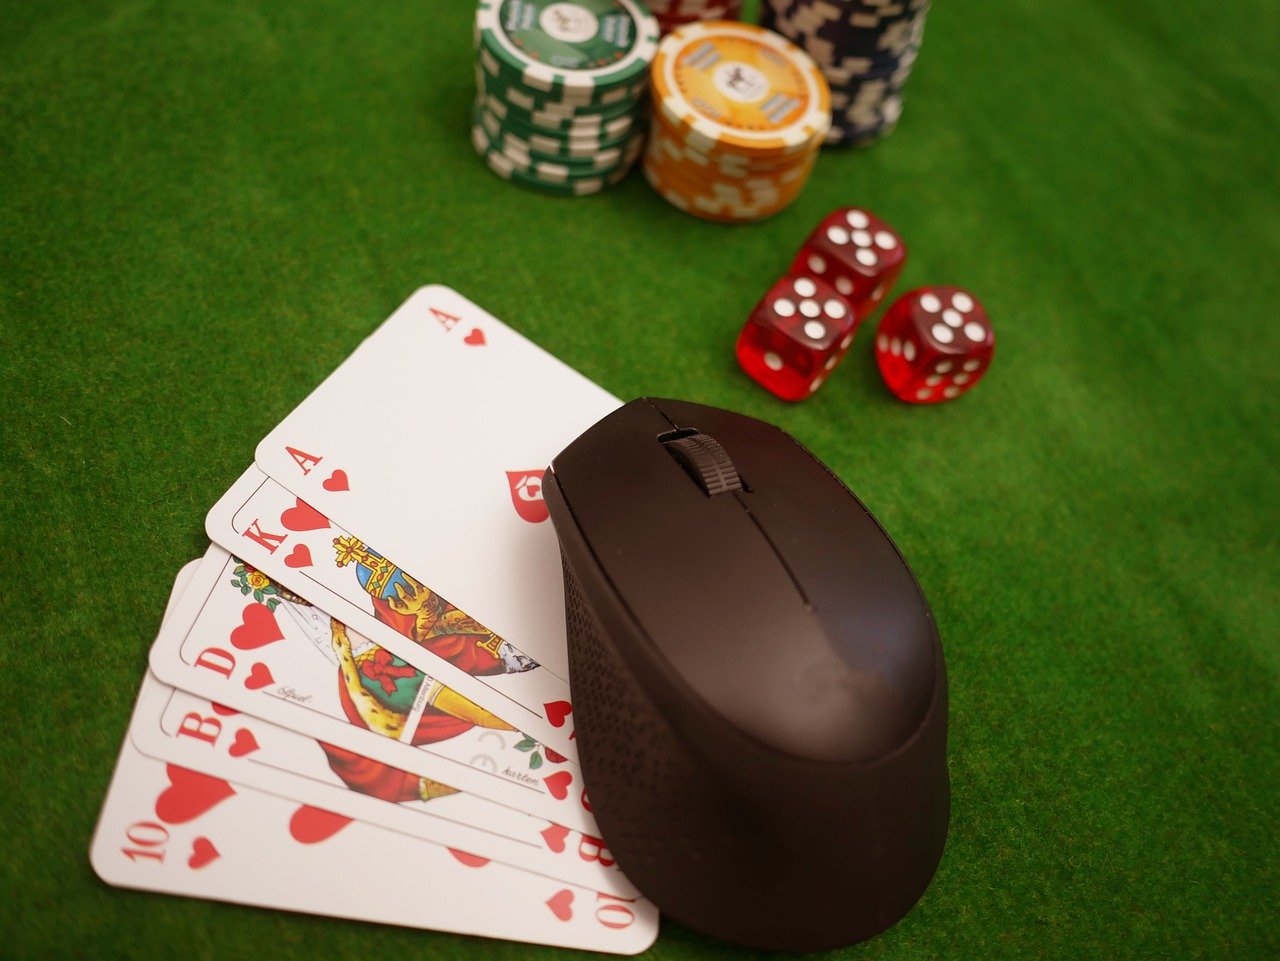 Cards, chips, dice, and a computer mouse